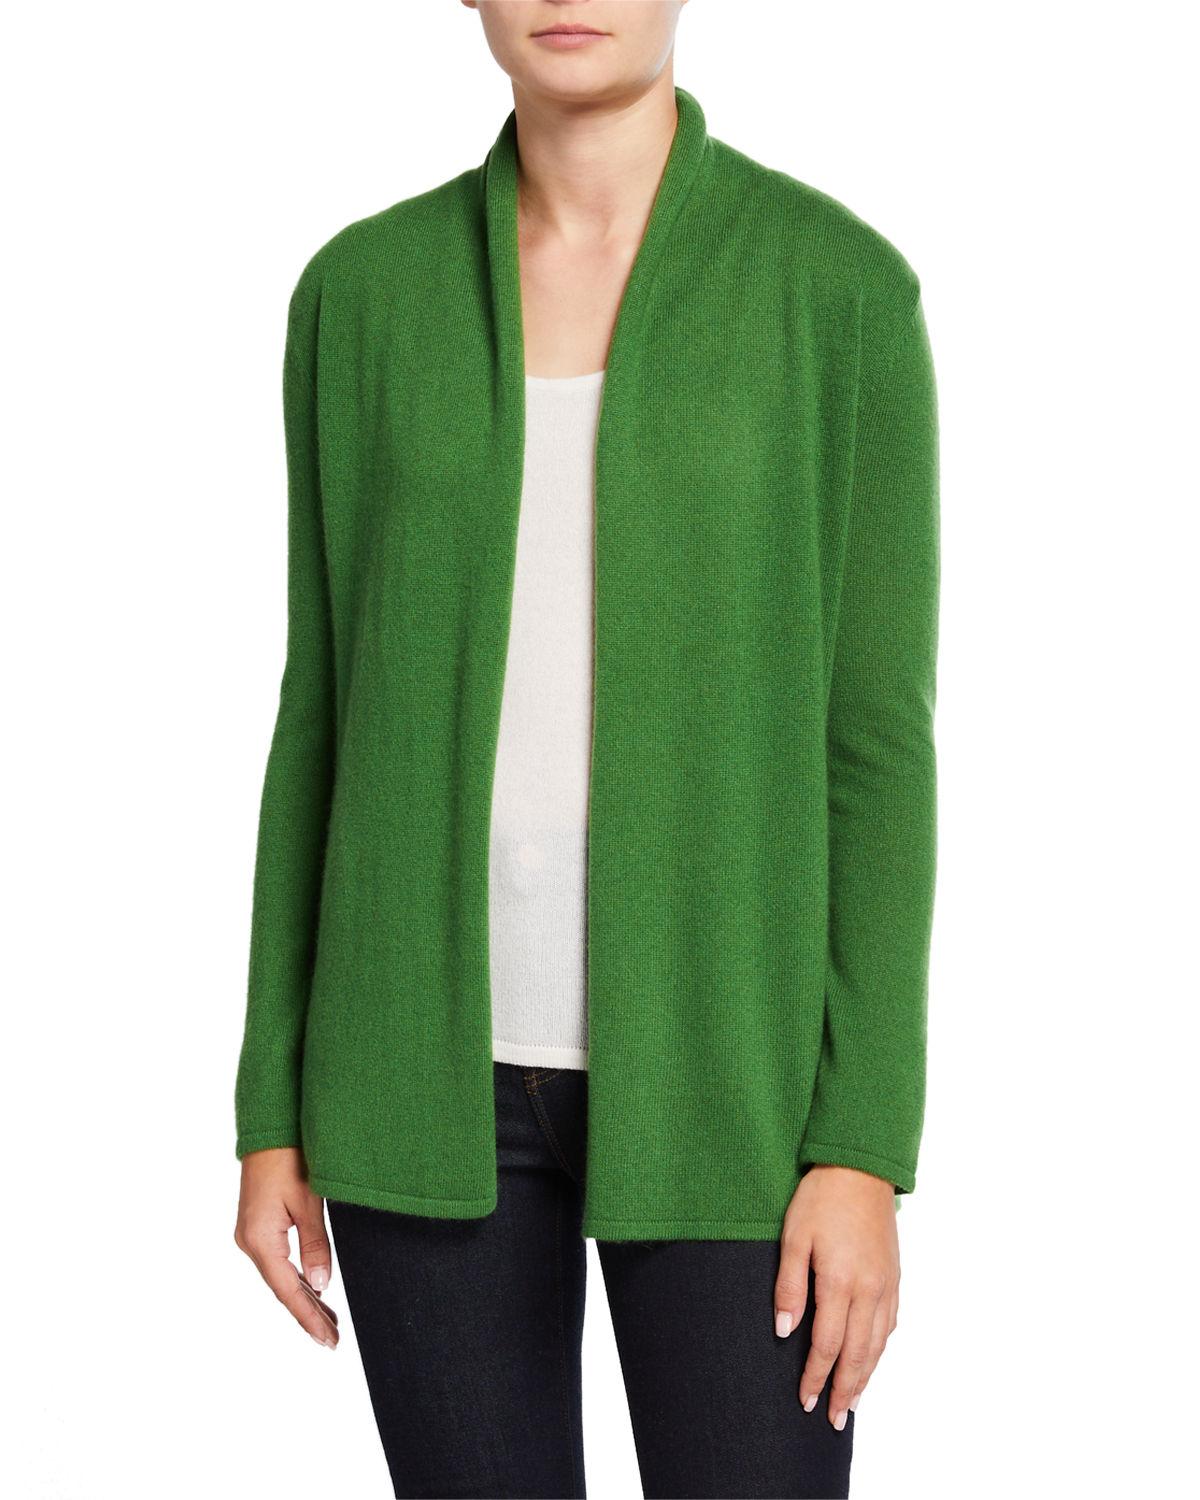 Neiman Marcus Cashmere Open-front Cardigan in Bottle Green (Green) - Lyst